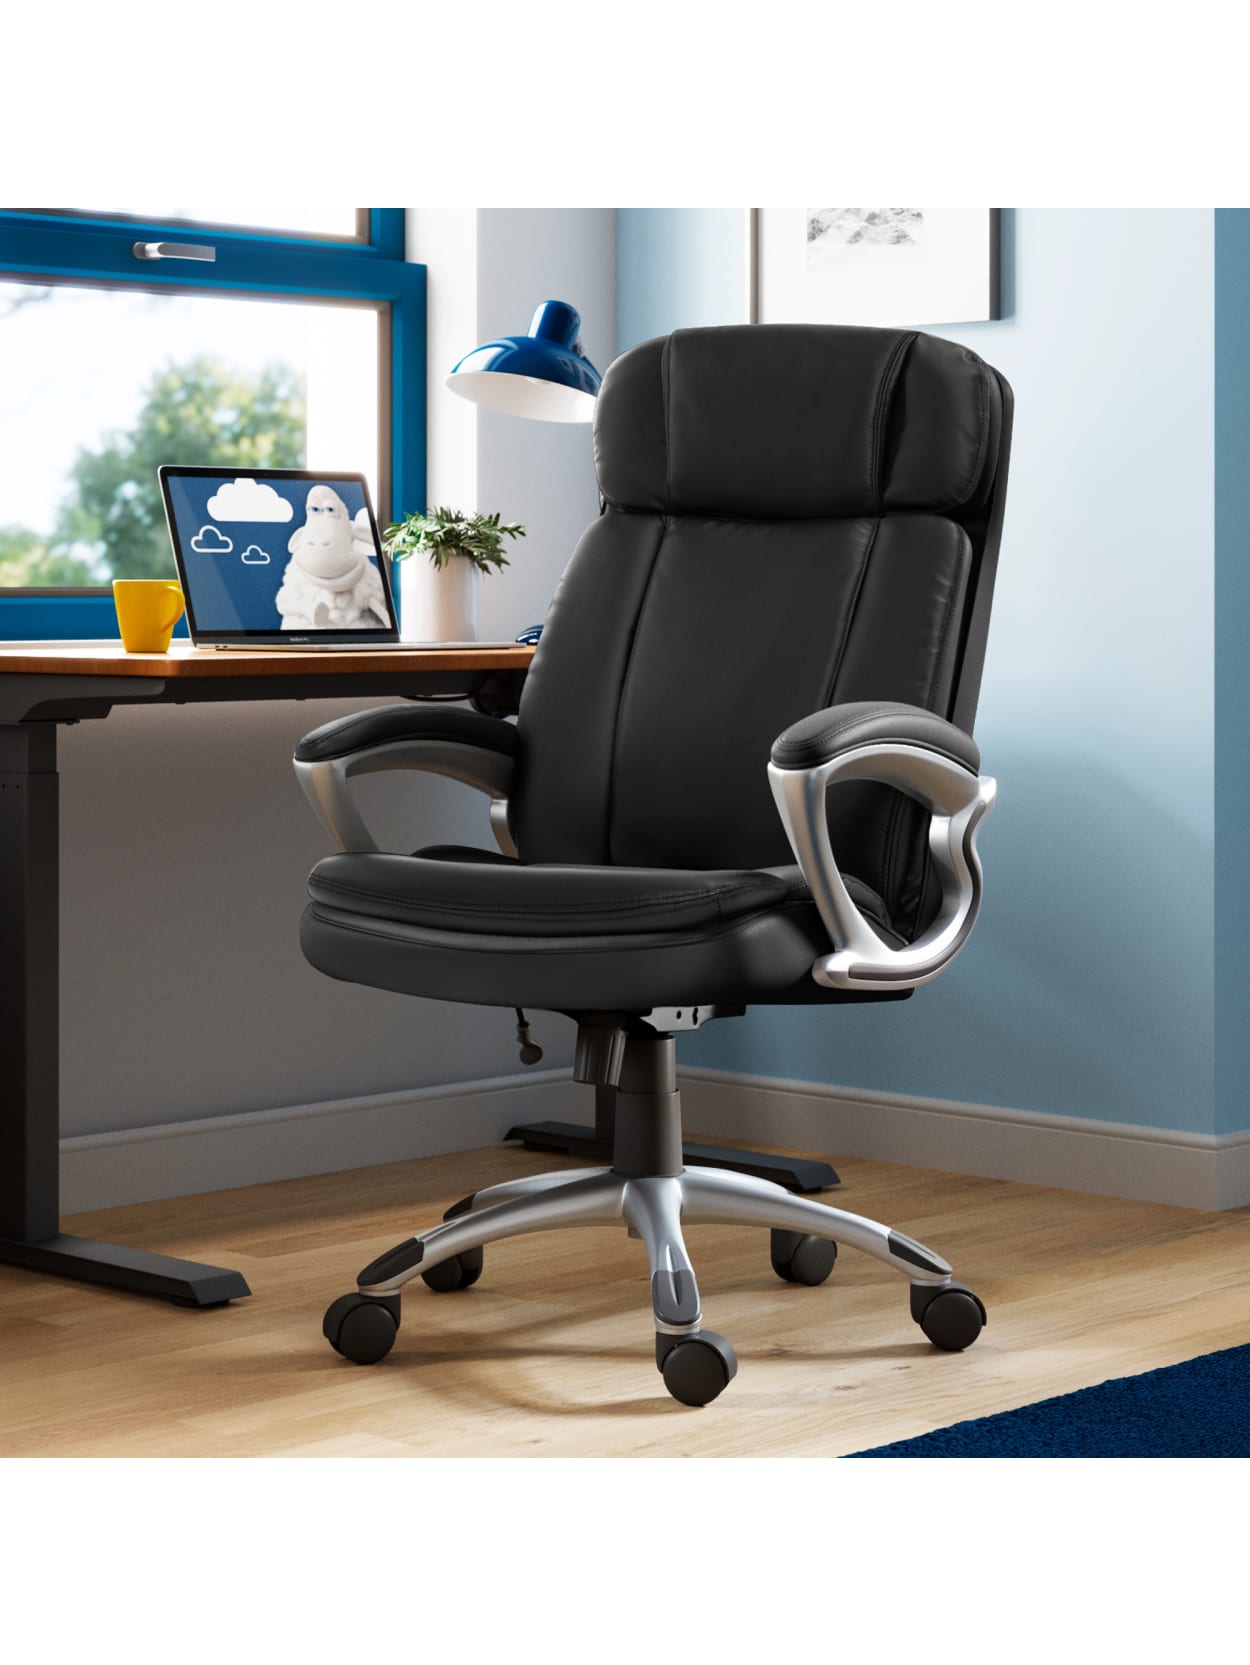 Serta Big And Tall Puresoft Bonded Leather High Back Chair Blacksilver Office Depot